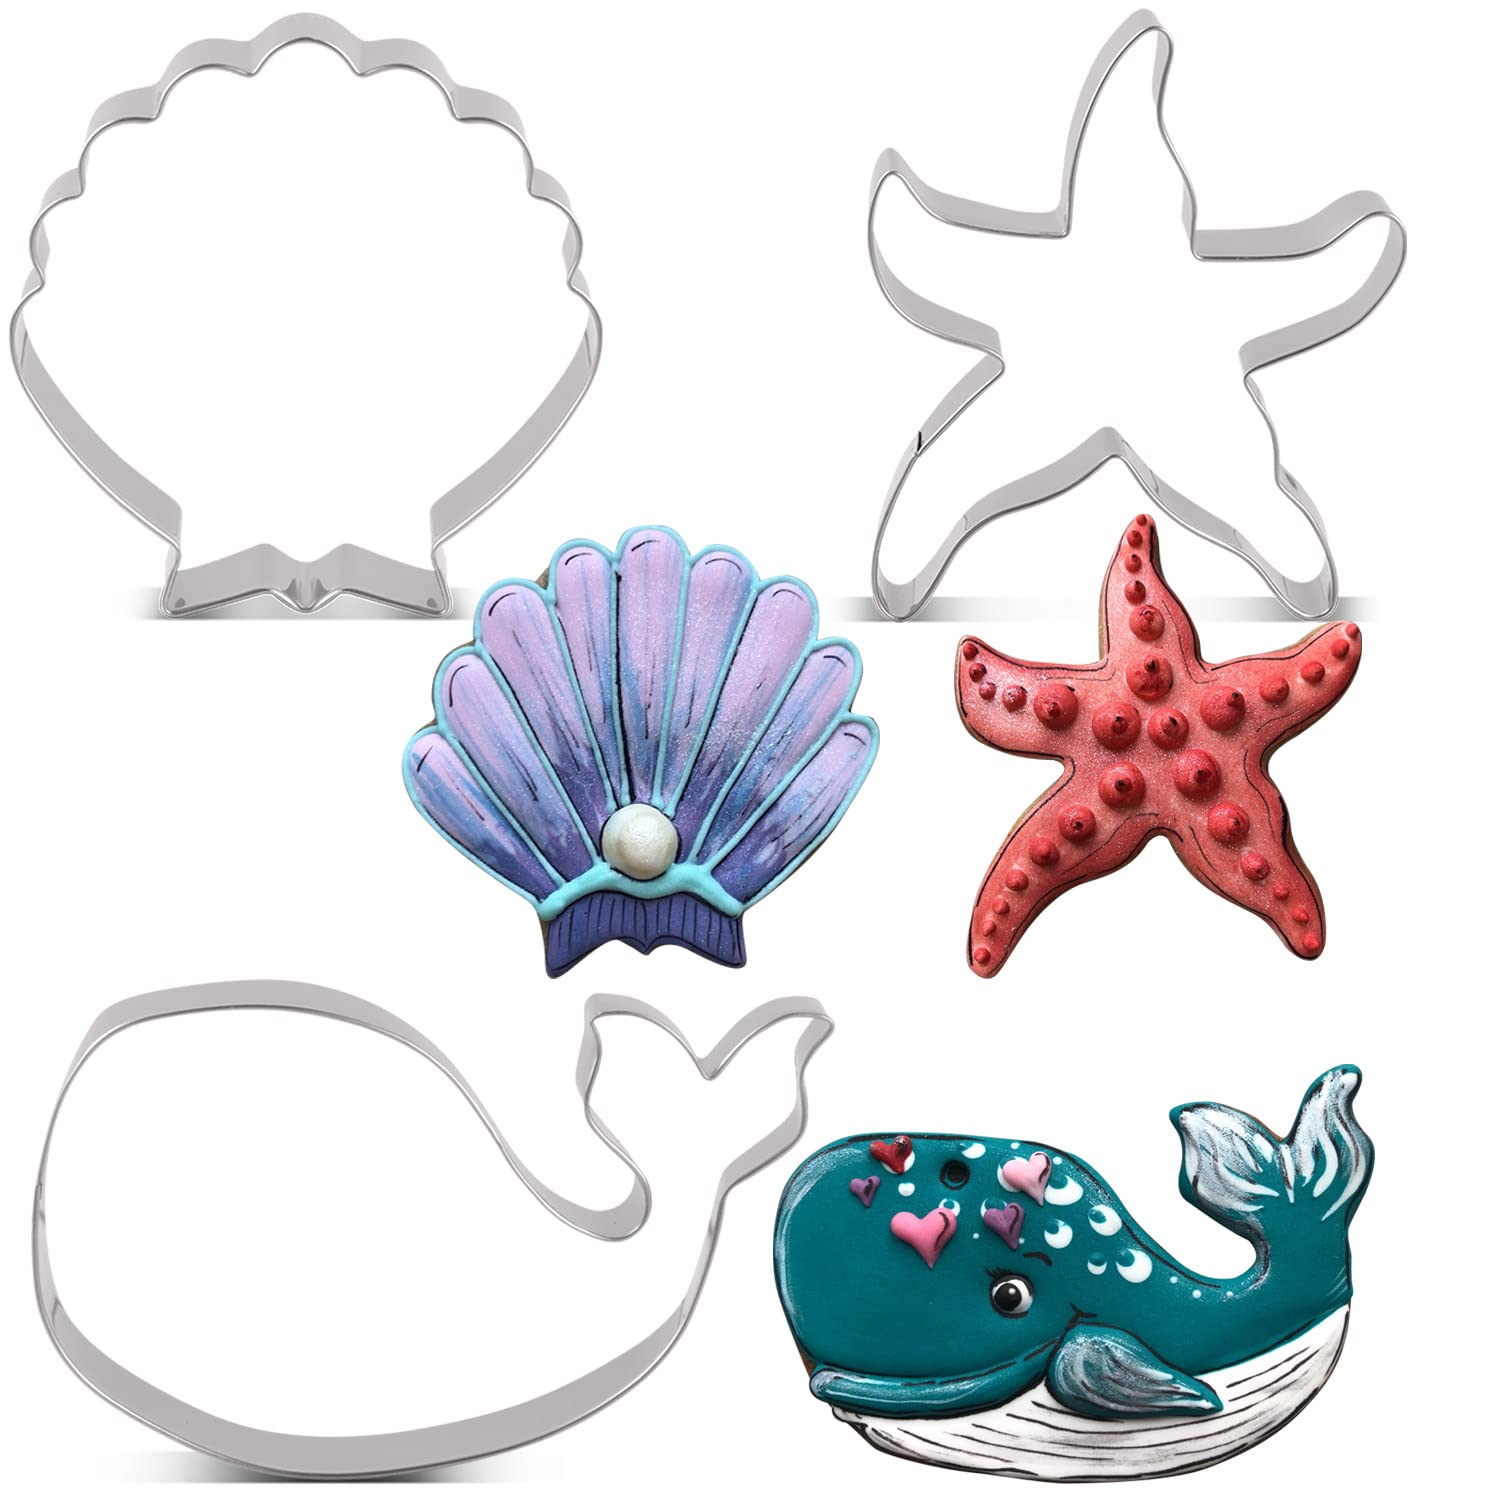 LILIAO Ocean Creatures Cookie Cutter Set - 3 Piece - Whale, Starfish and Seashell Biscuit Fondant Cutters - Stainless Steel